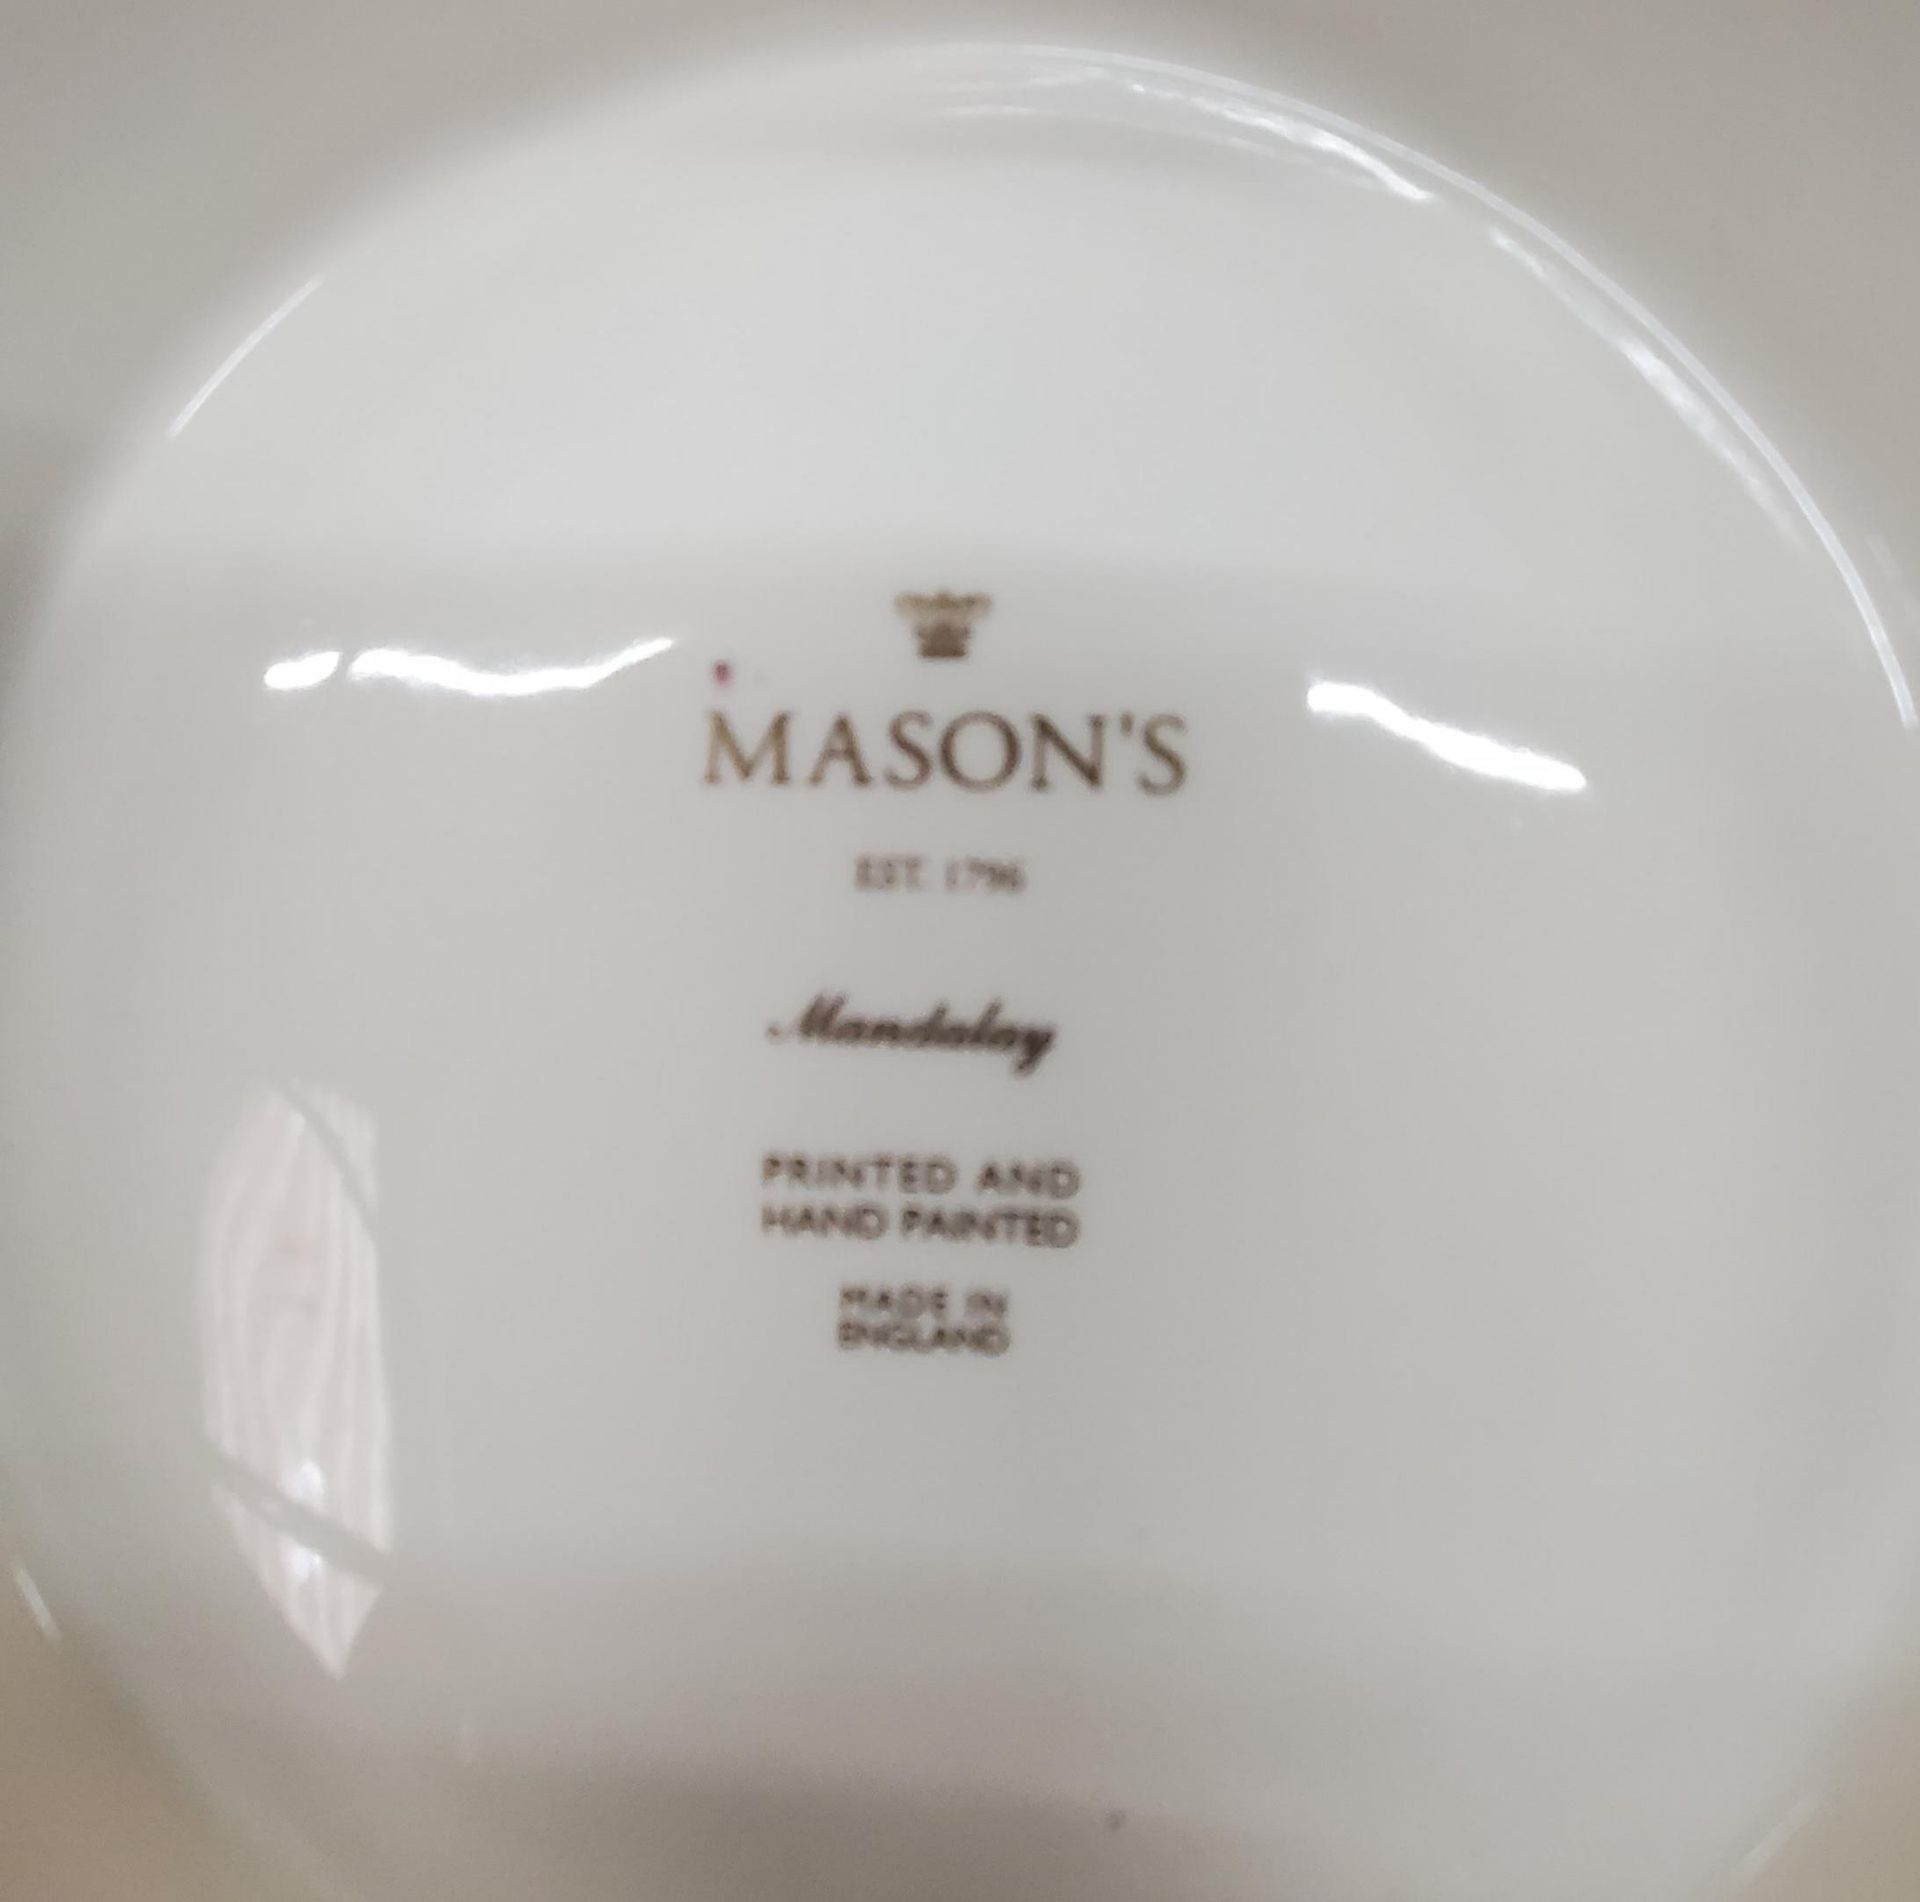 A COLLECTION OF MASON'S MANDALAY CERAMICS TO INCLUDE A LARGE TABLE LAMP, PLATES, A LARGE BOWL, - Image 3 of 3